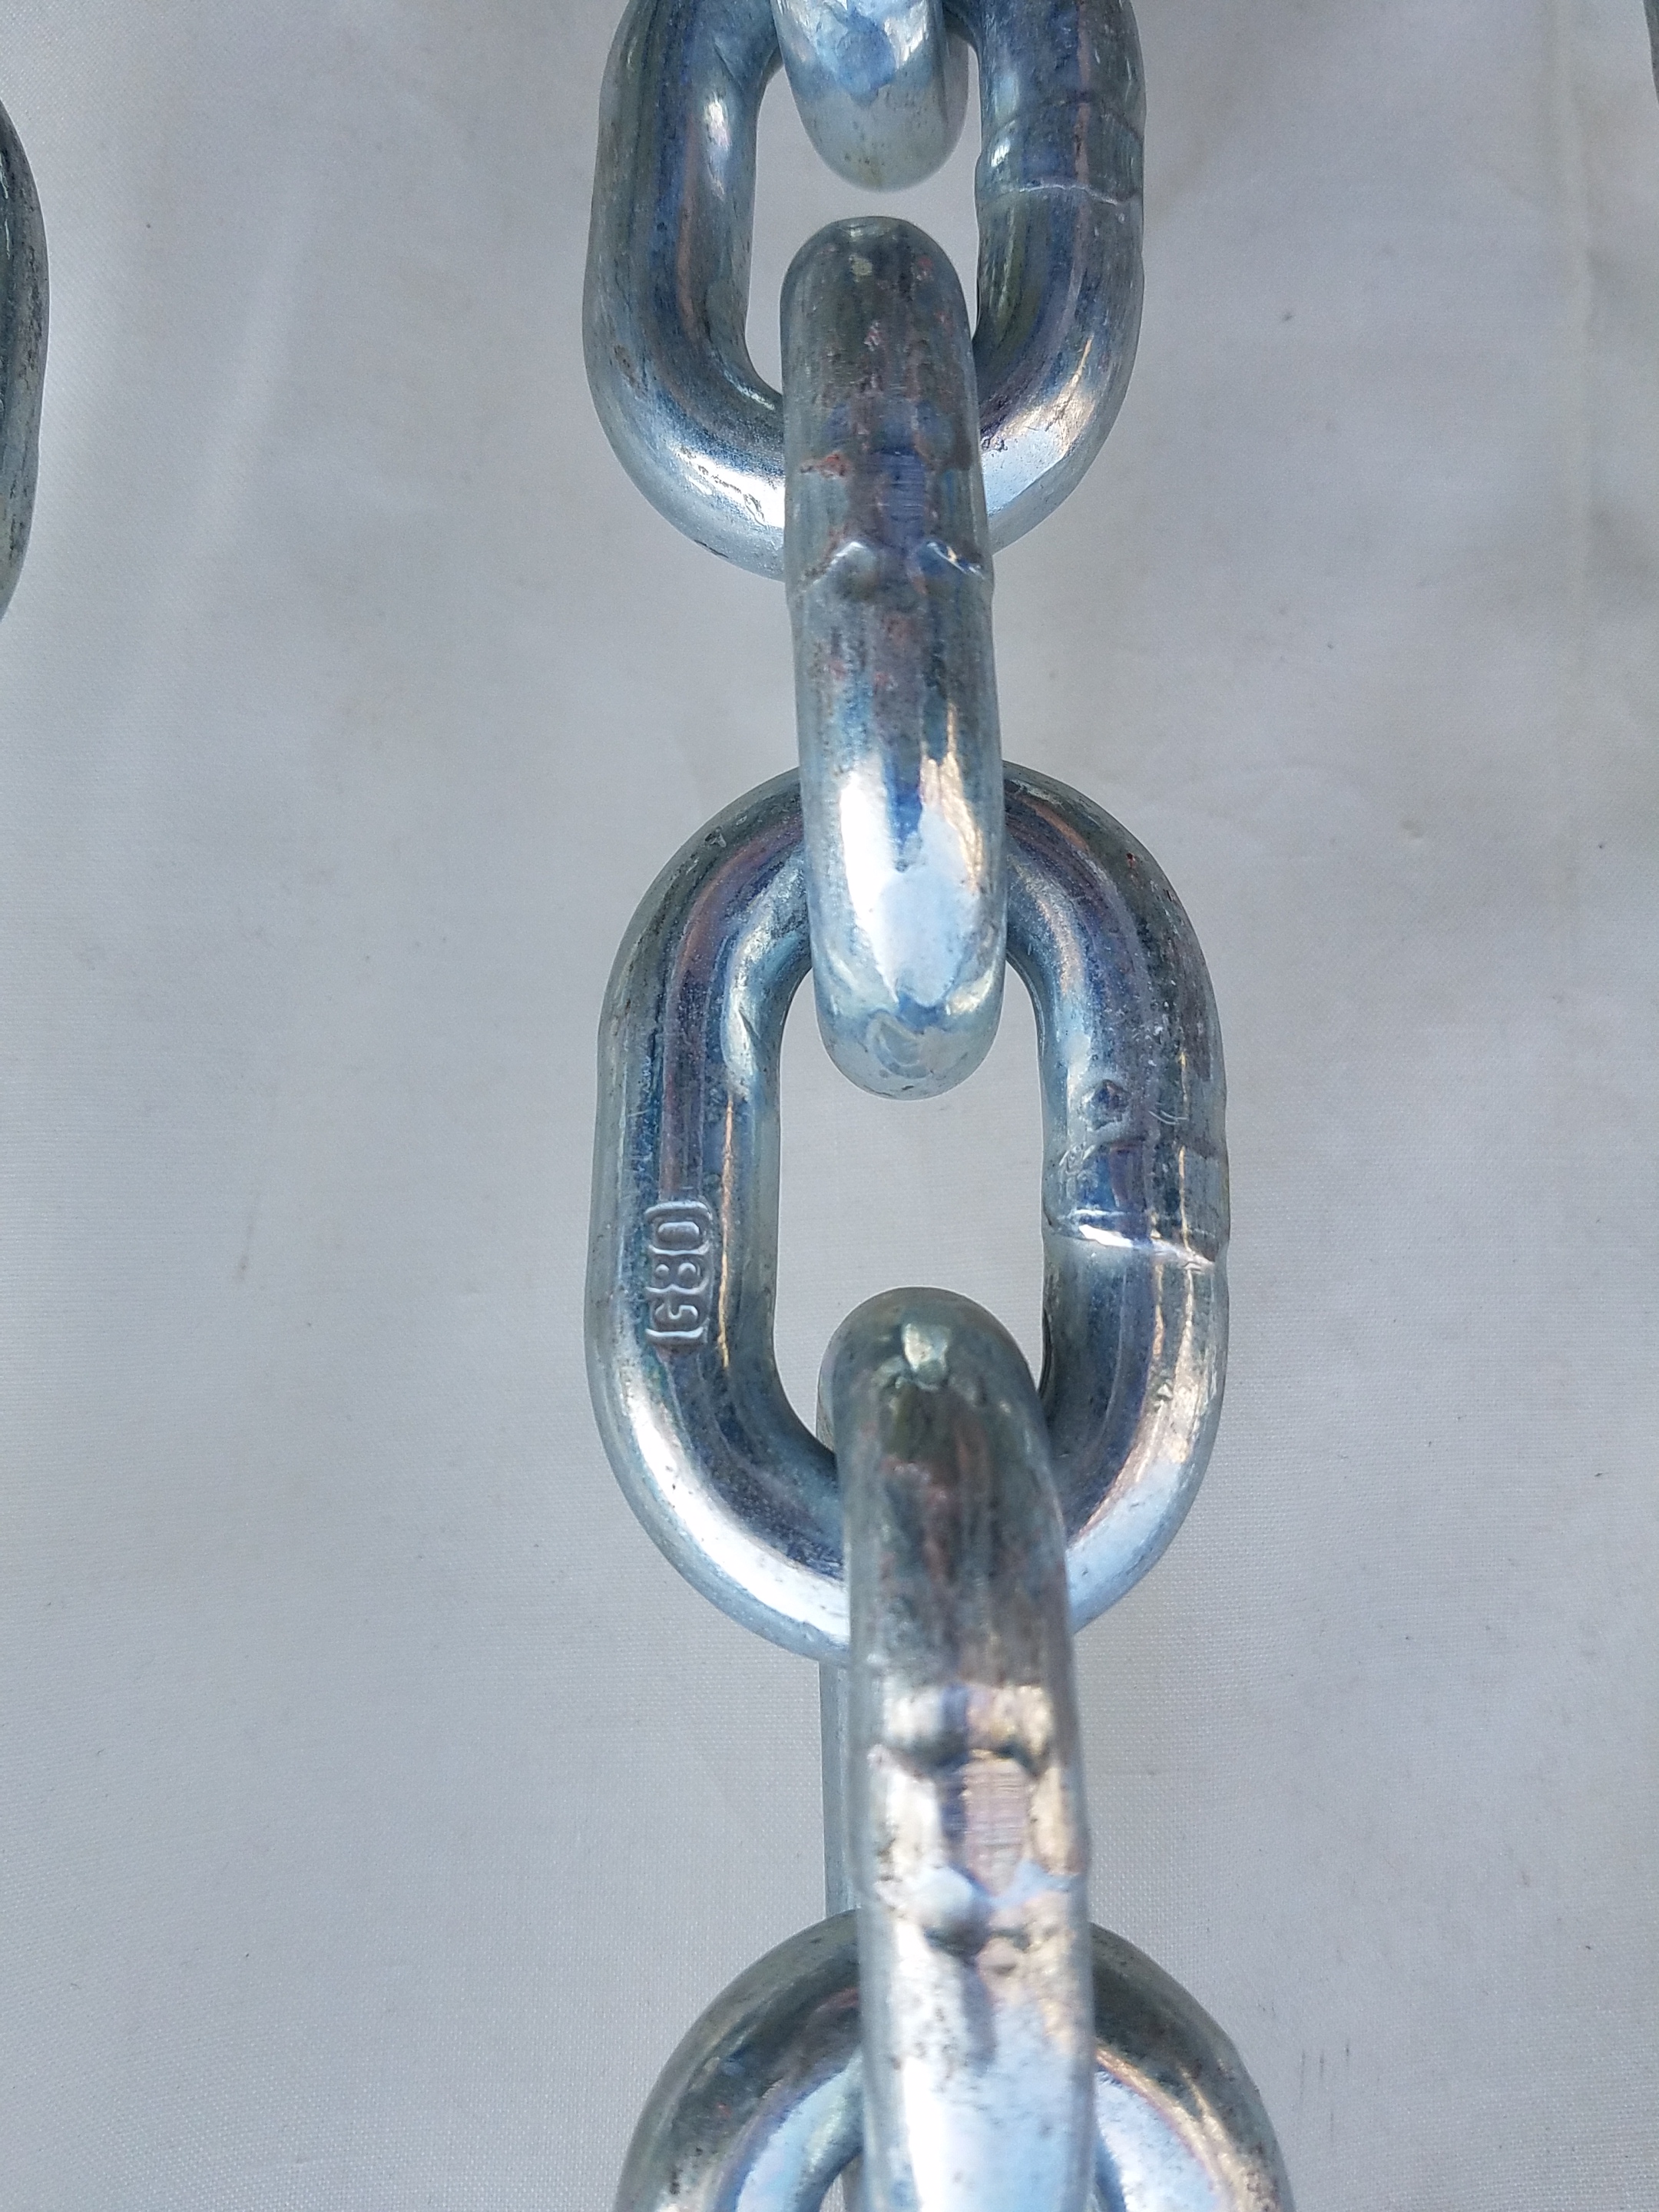 G80 alloy lifting chain